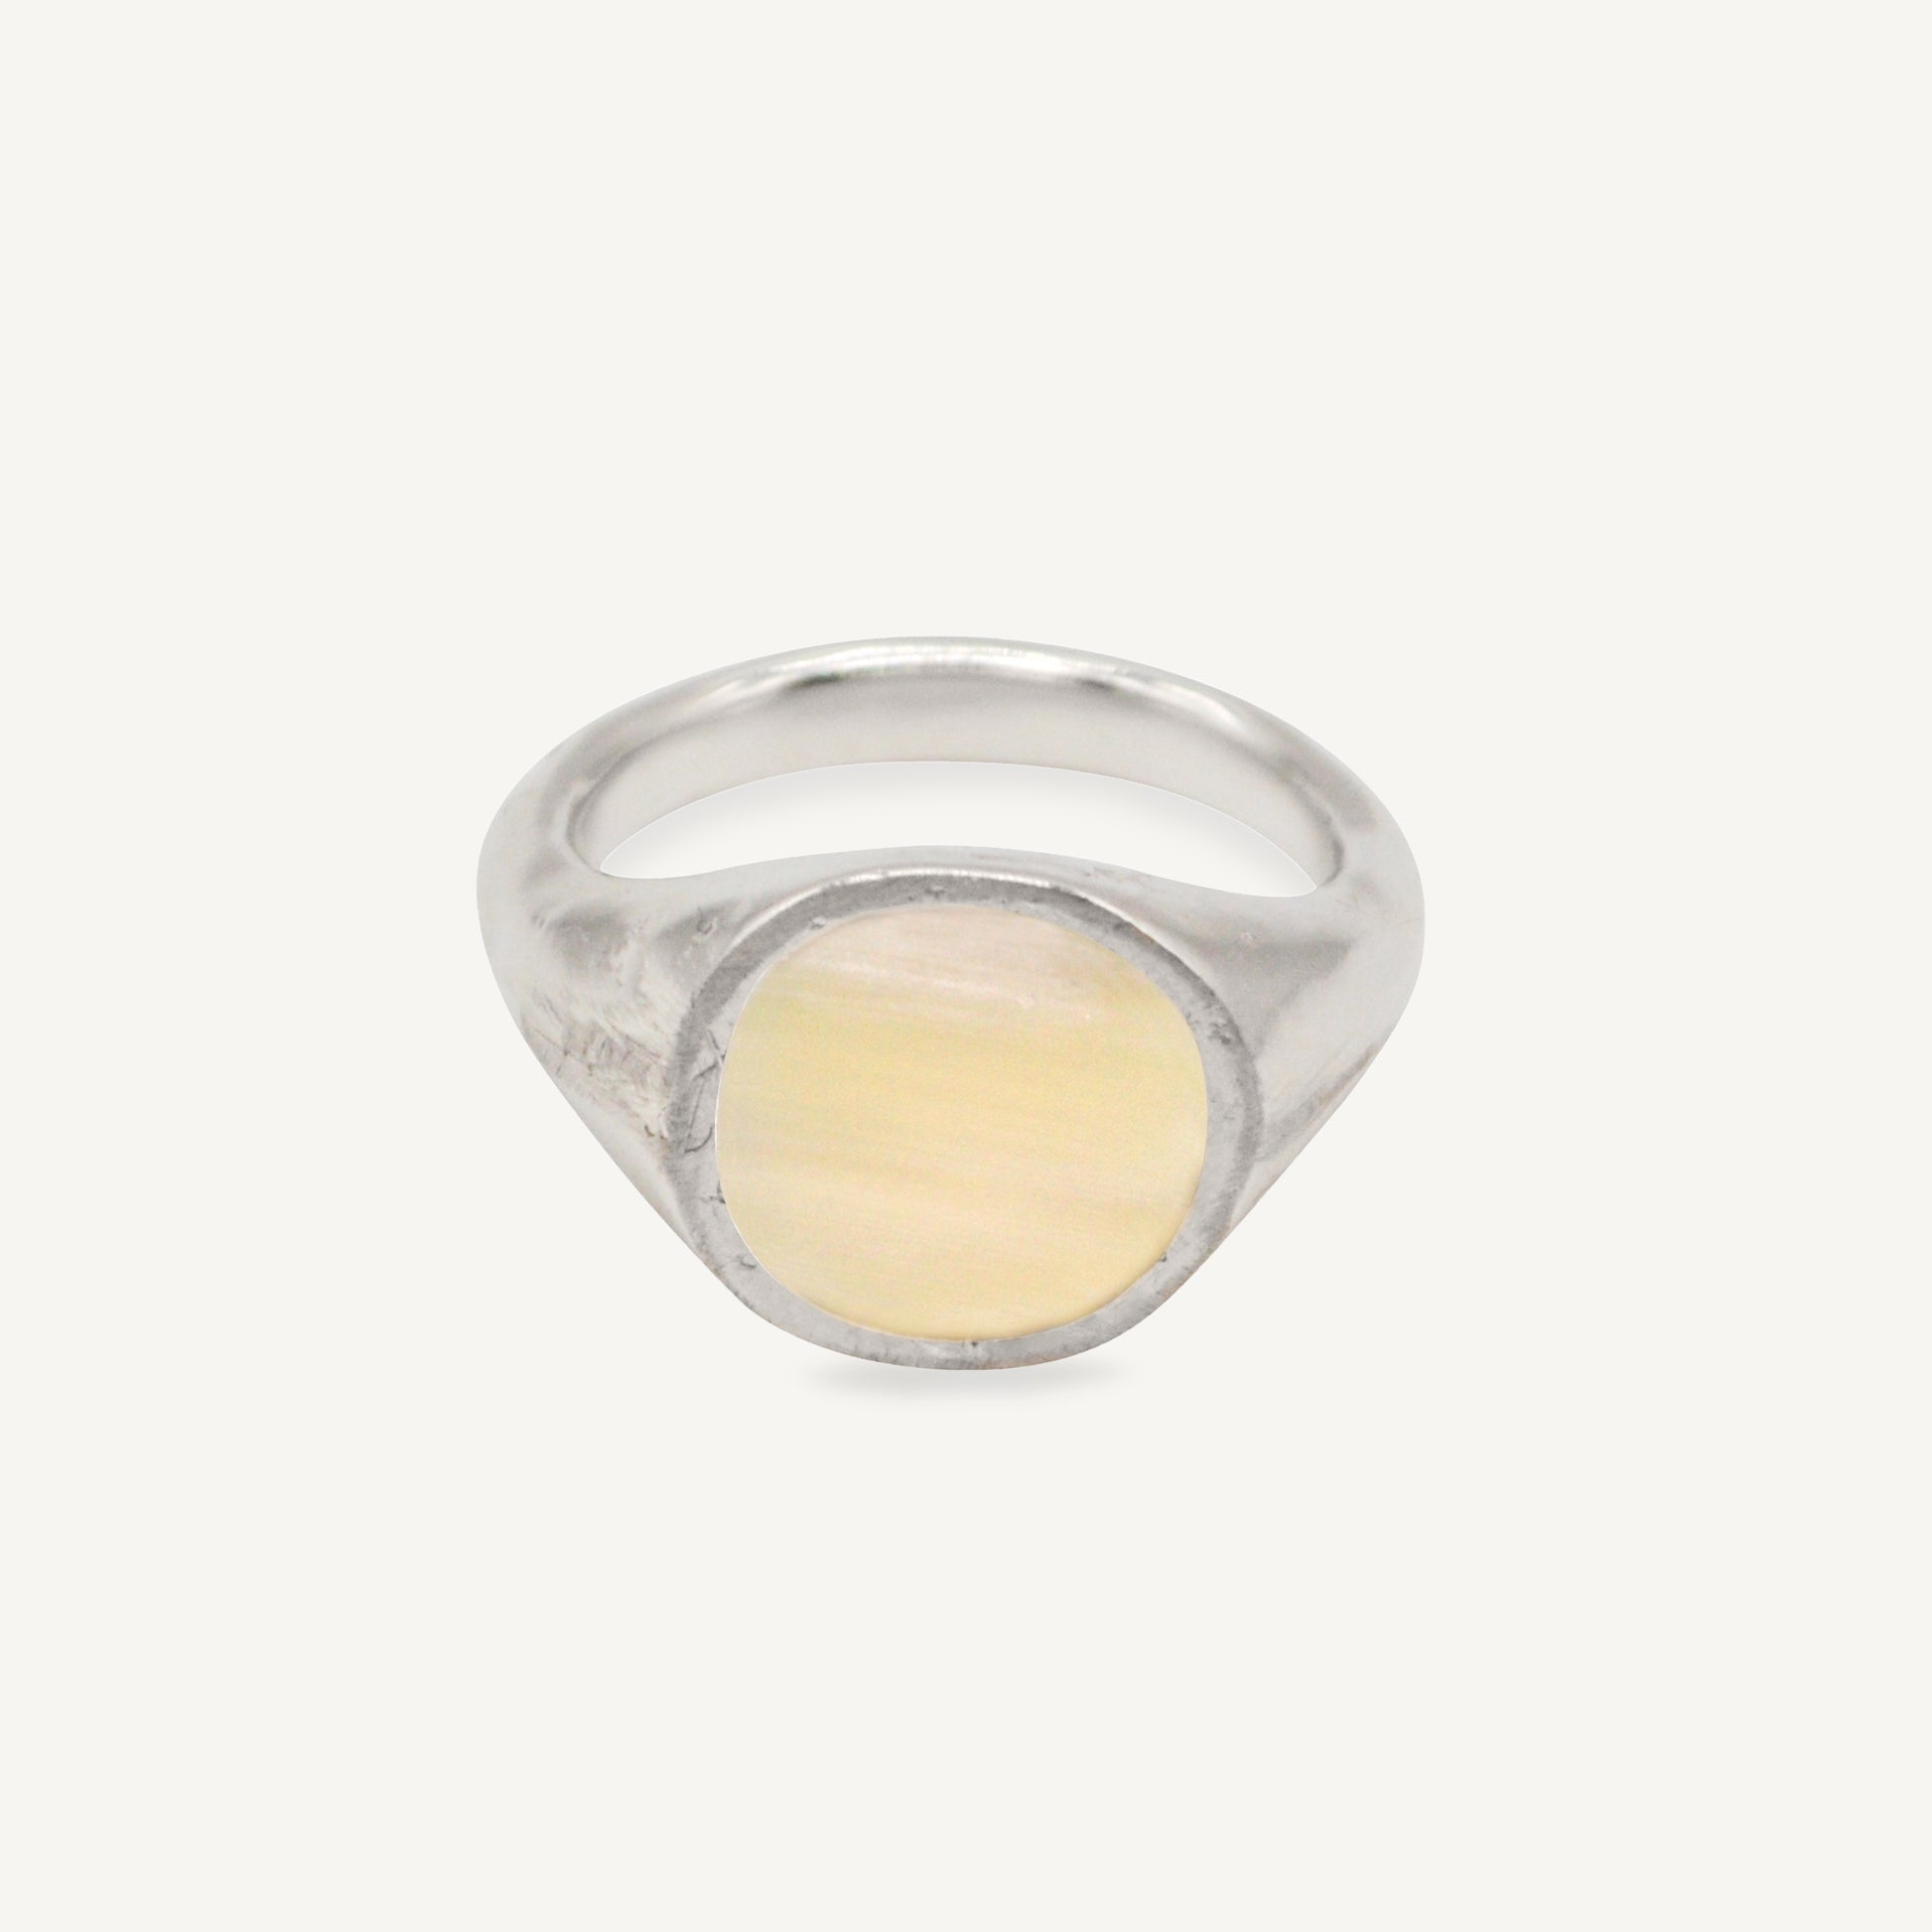 The RAY ring is a chunky silver and horn signet ring with organic textured silver finish ethically handmade in London from recycled silver by Folde Jewellery